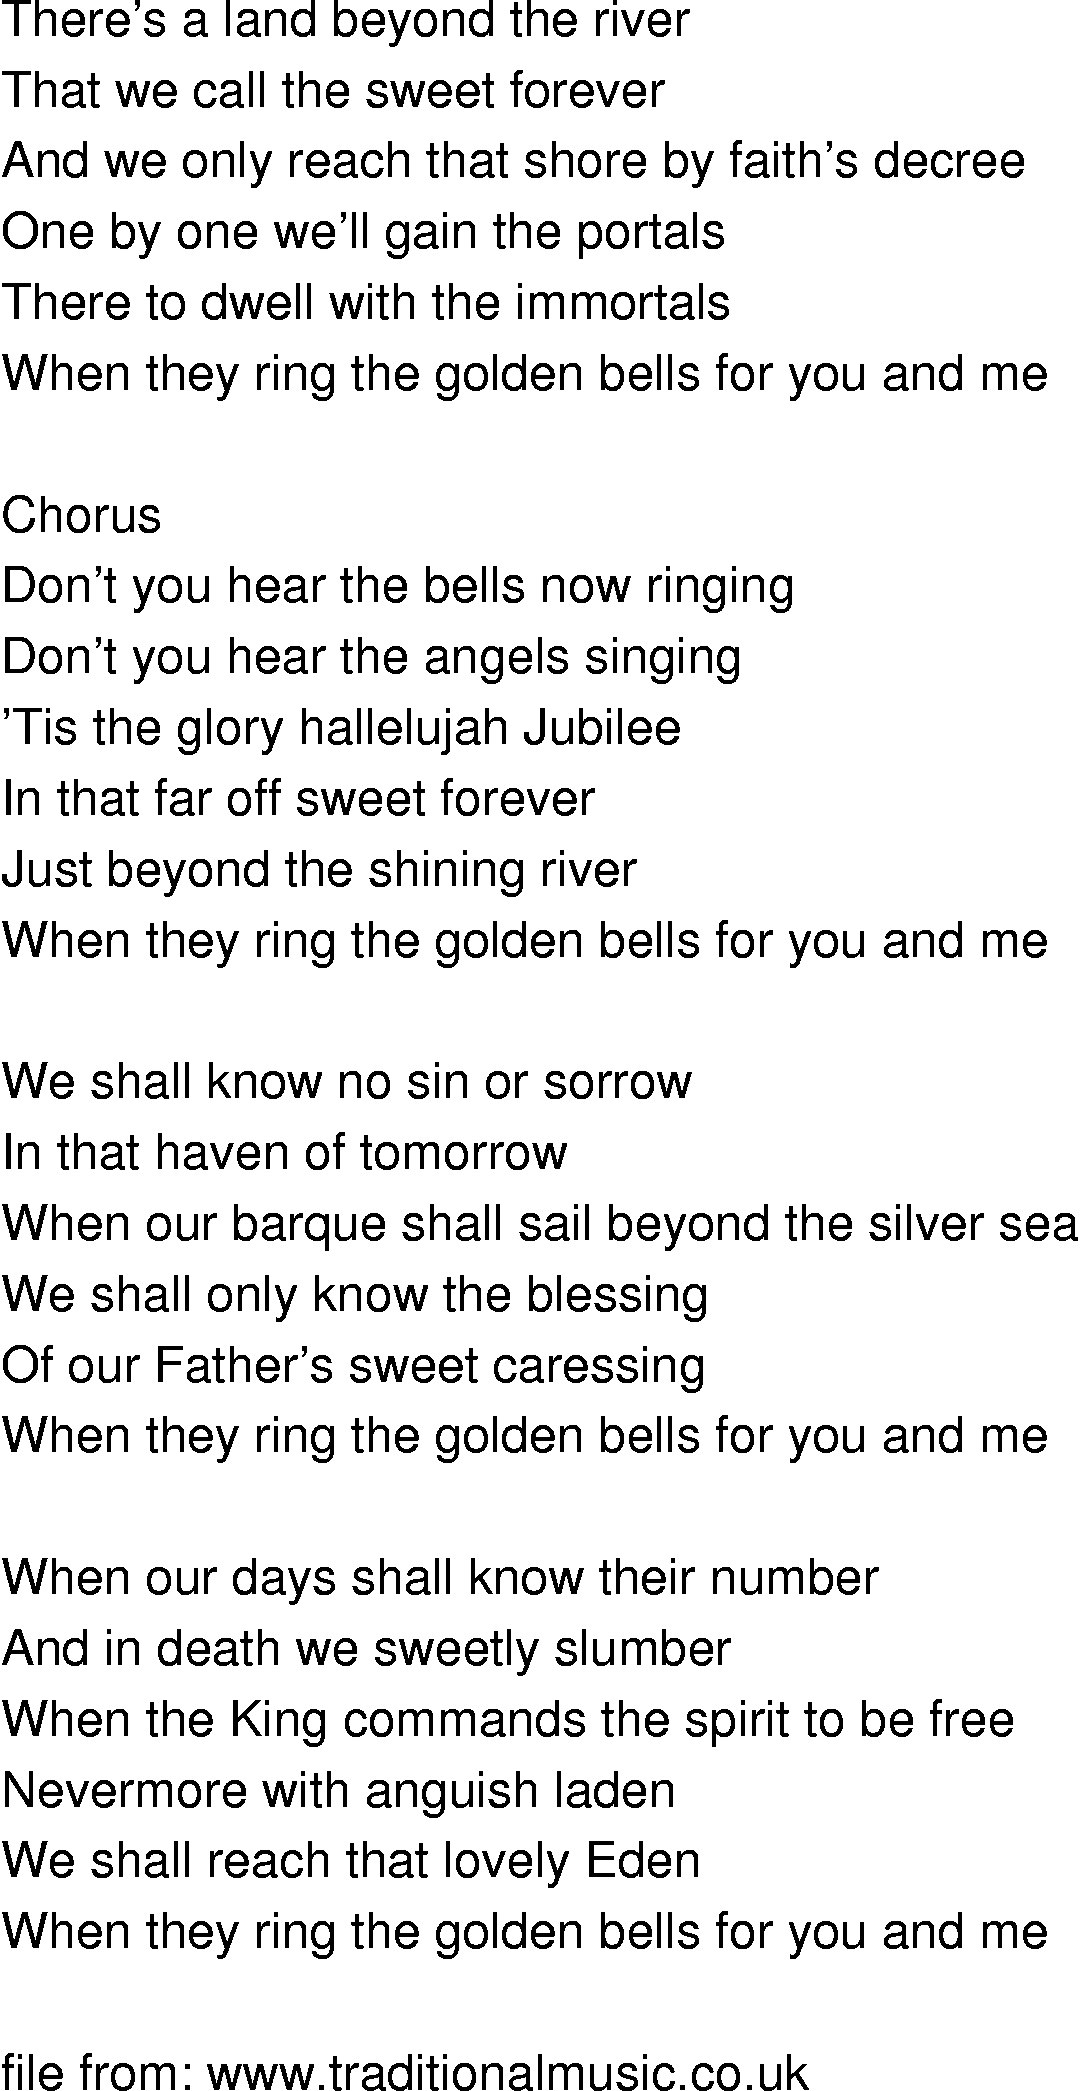 Old-Time (oldtimey) Song Lyrics - when they ring the golden bells